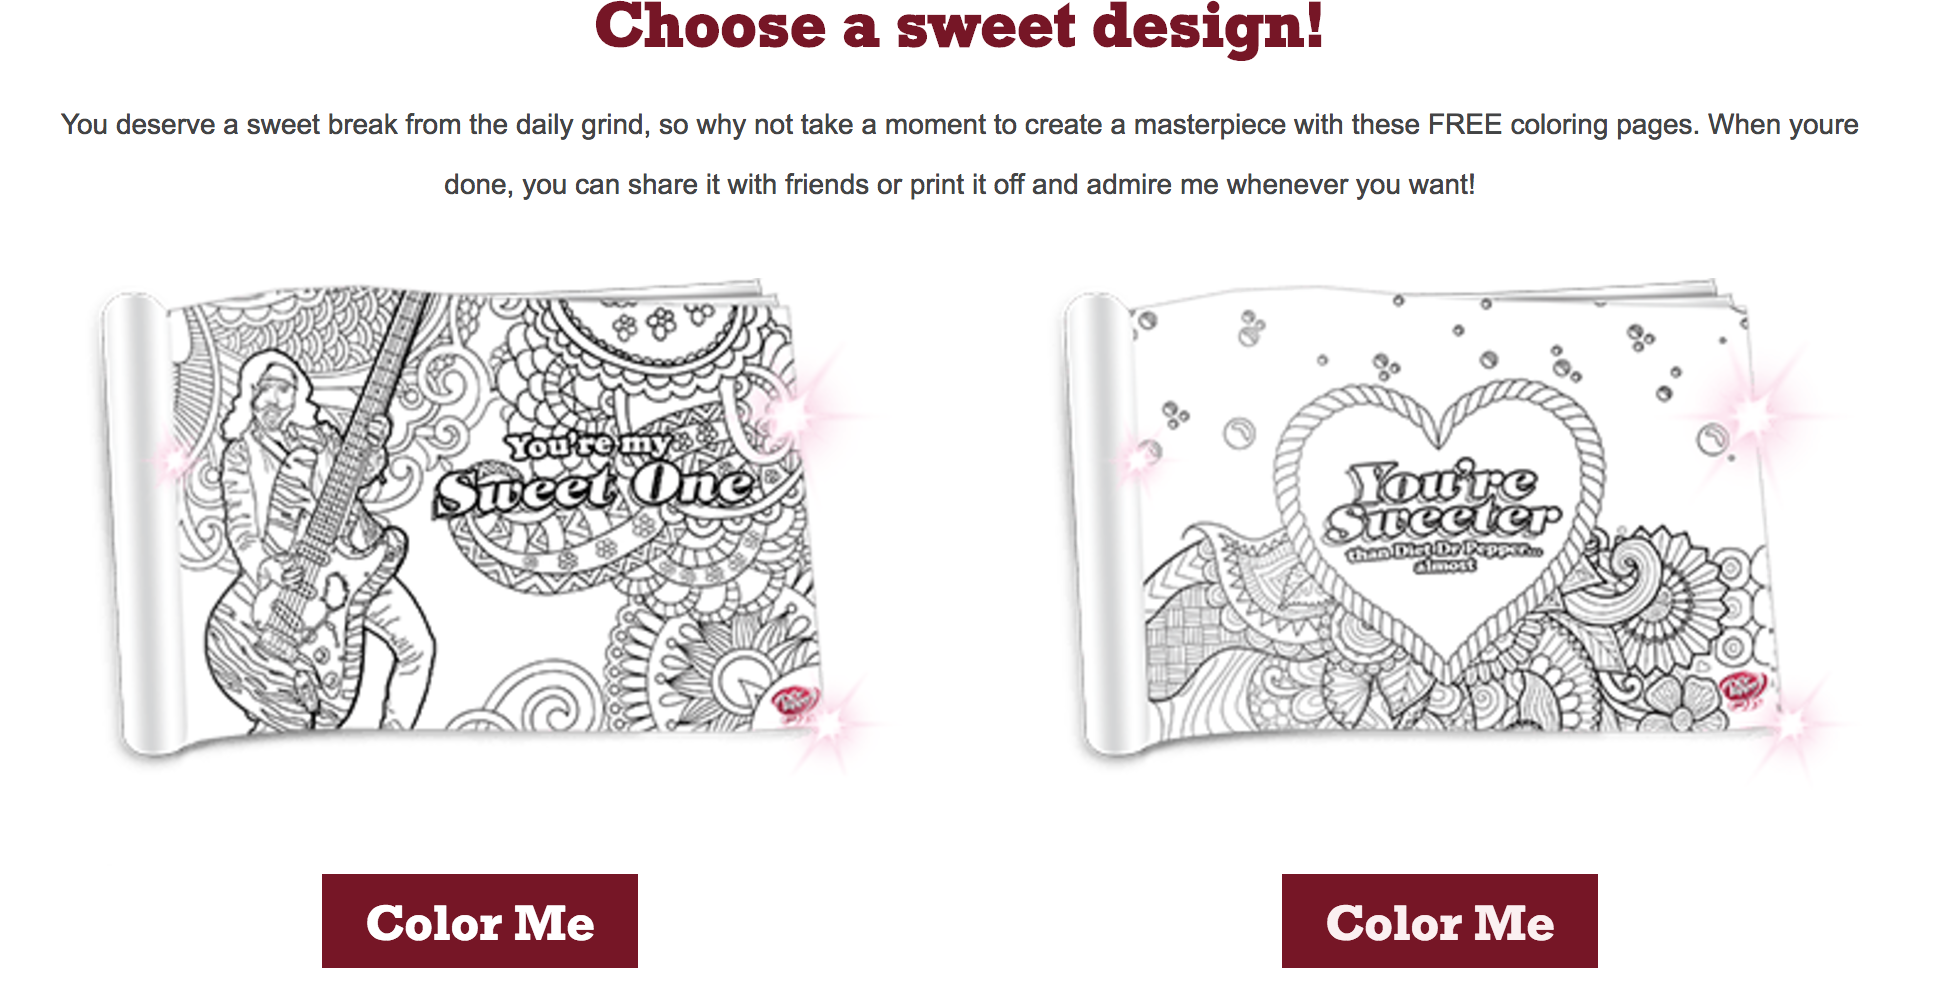 Dr Pepper Sweet Rewards Coloring page